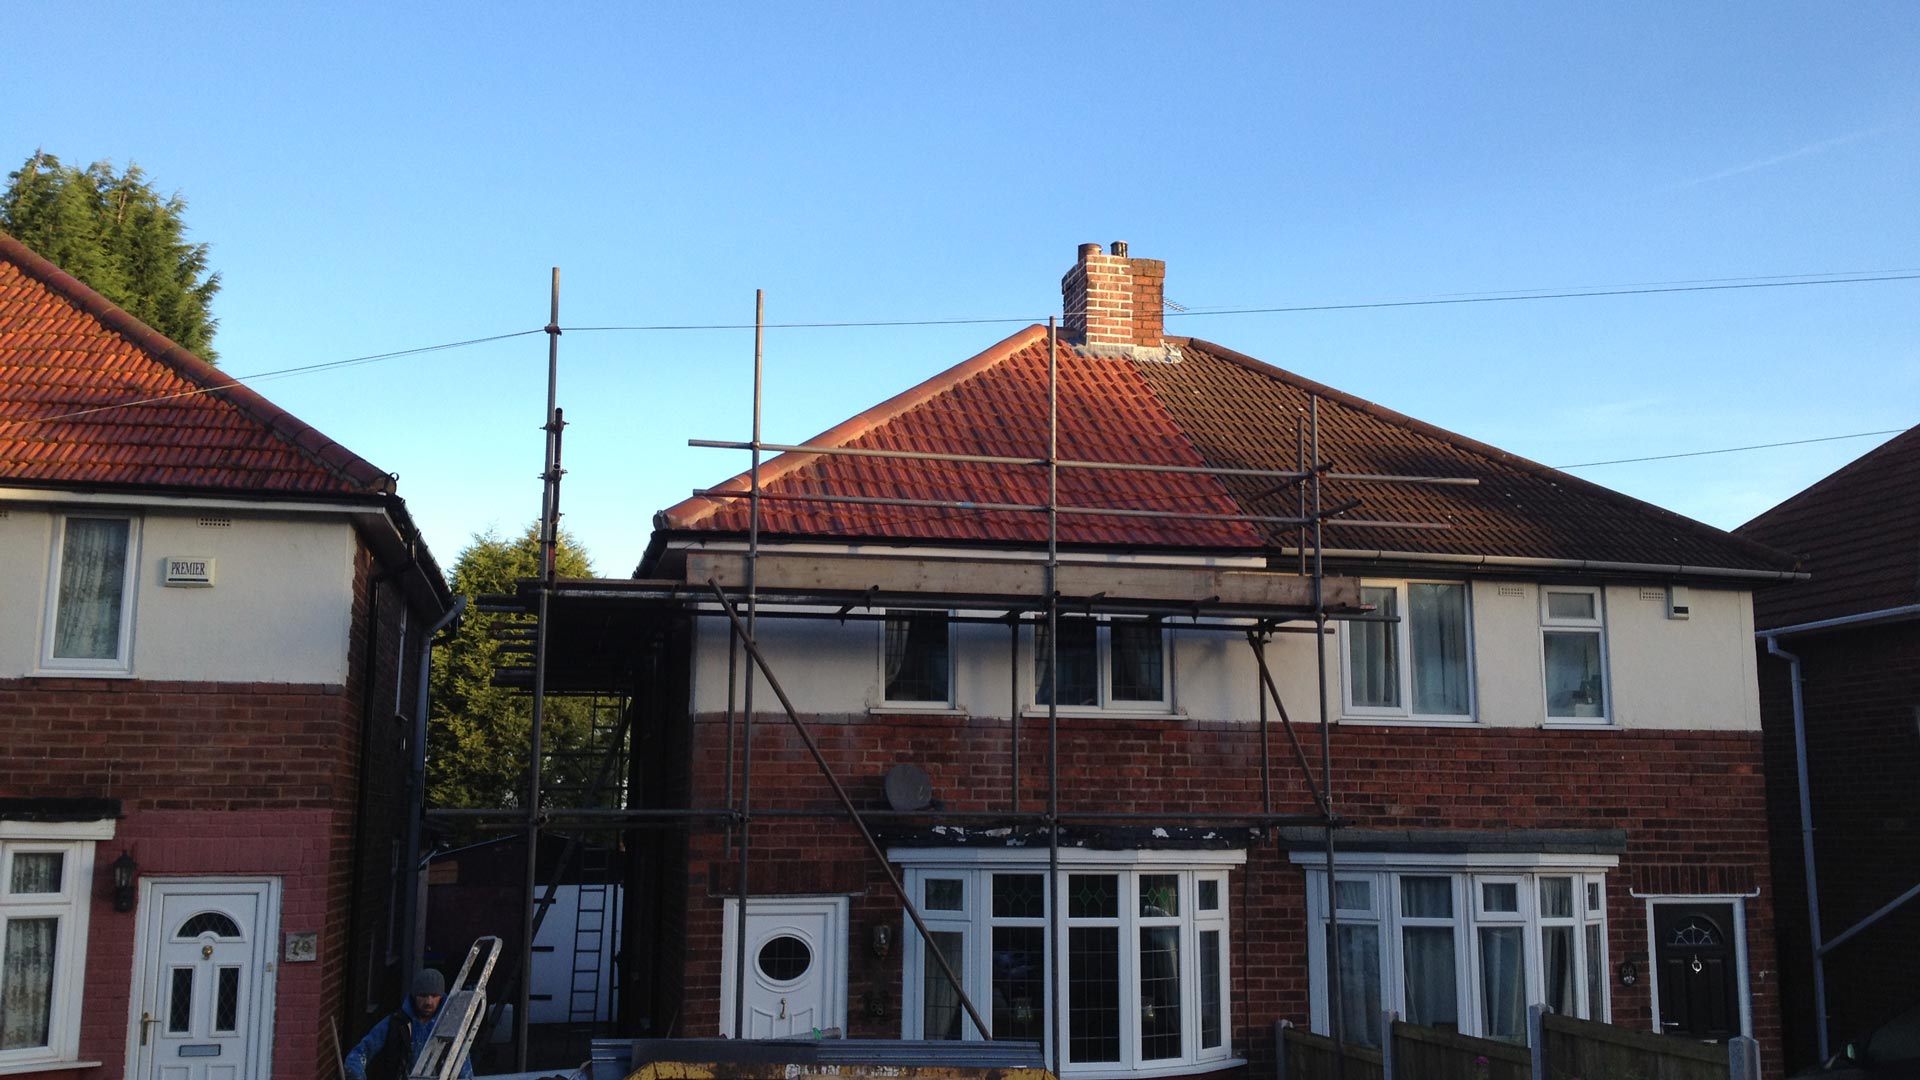 Re-roofing work that is being carried out for a customer